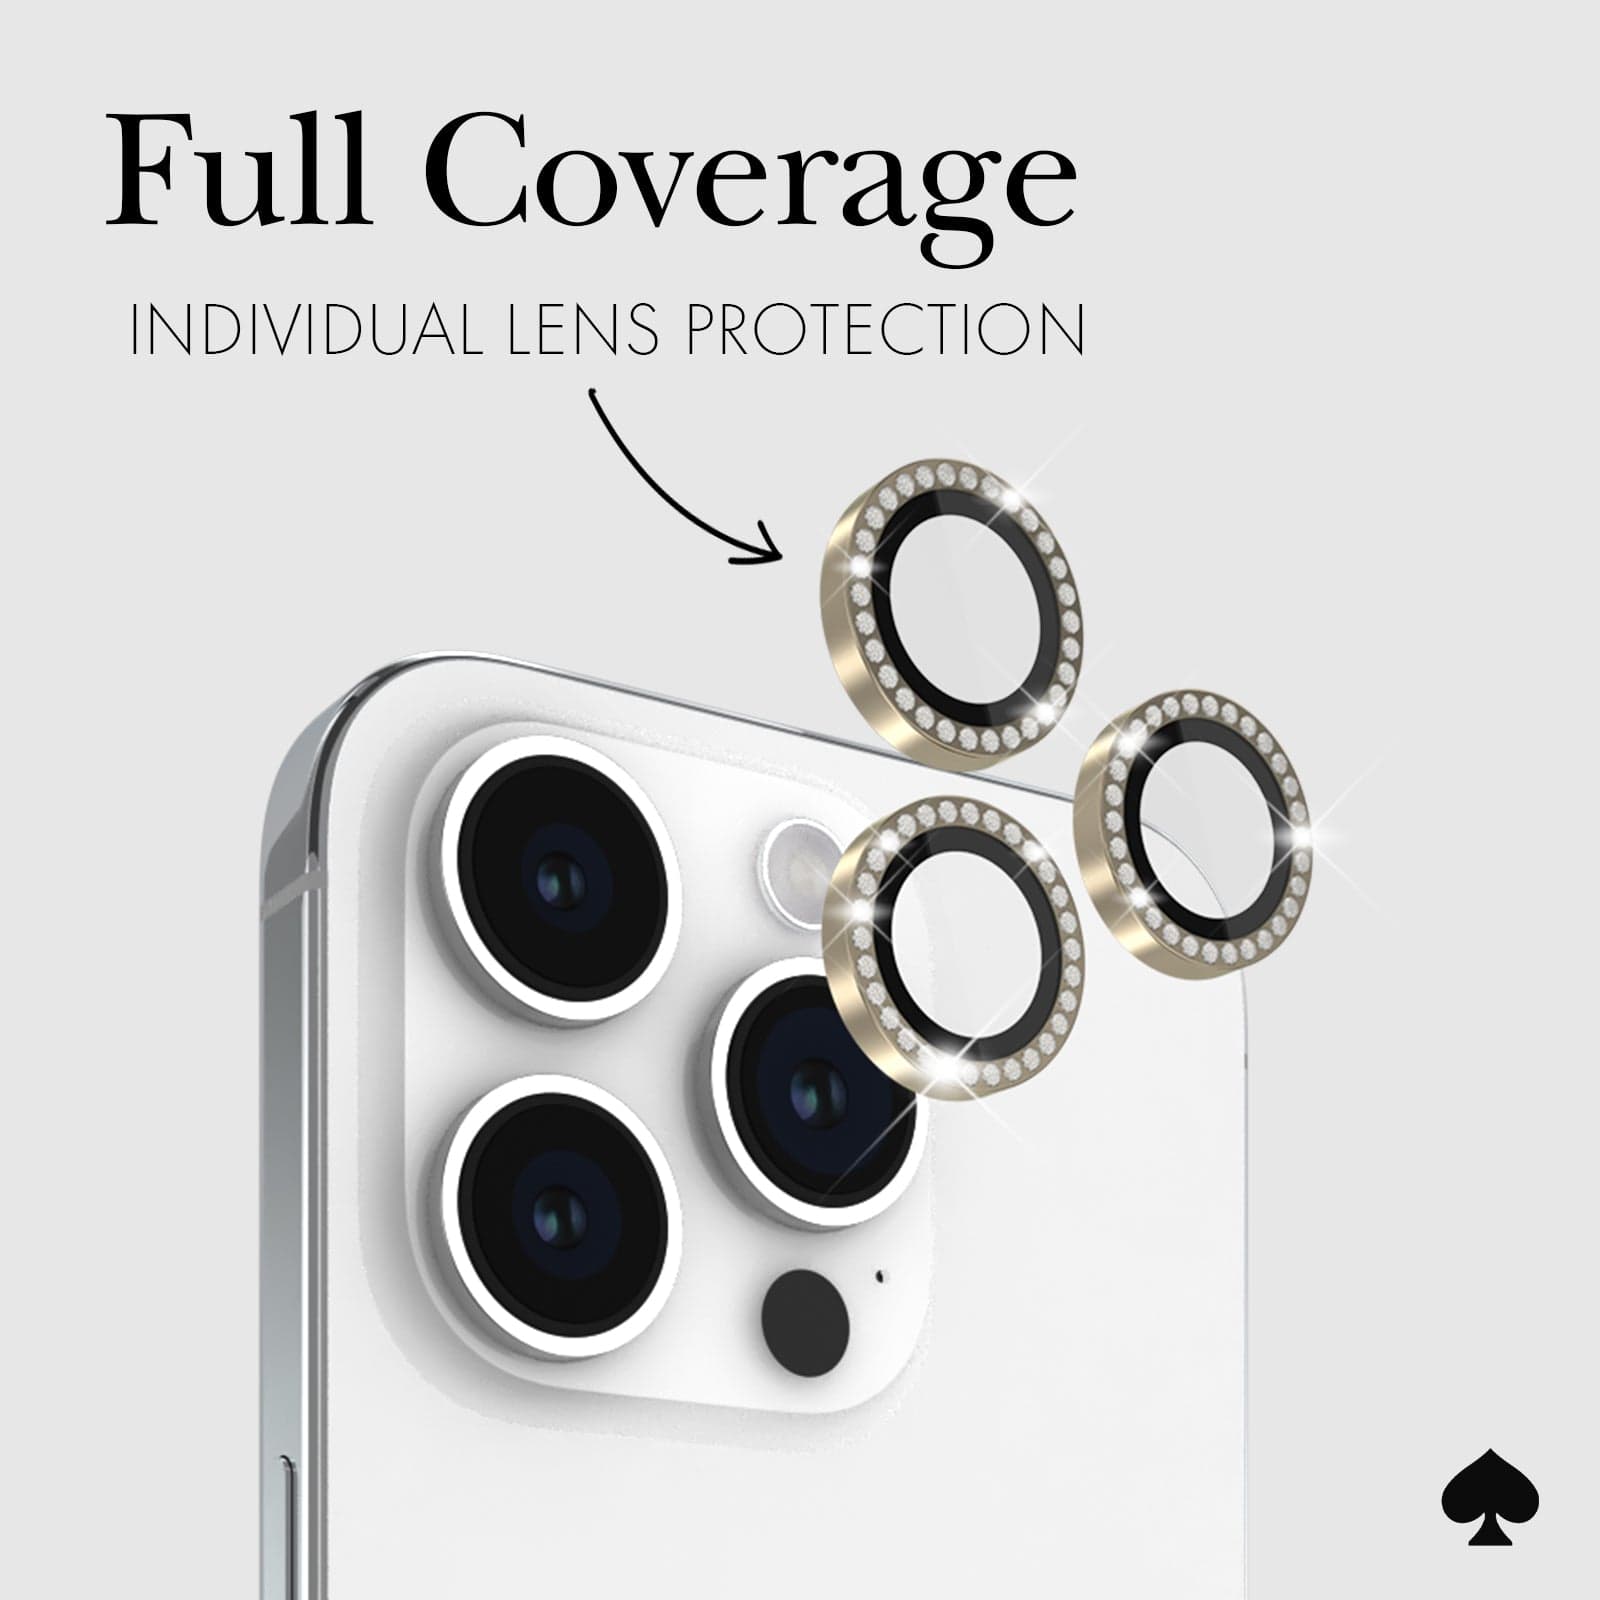 FULL COVERAGE INDIVIDUAL LENS PROTECTION